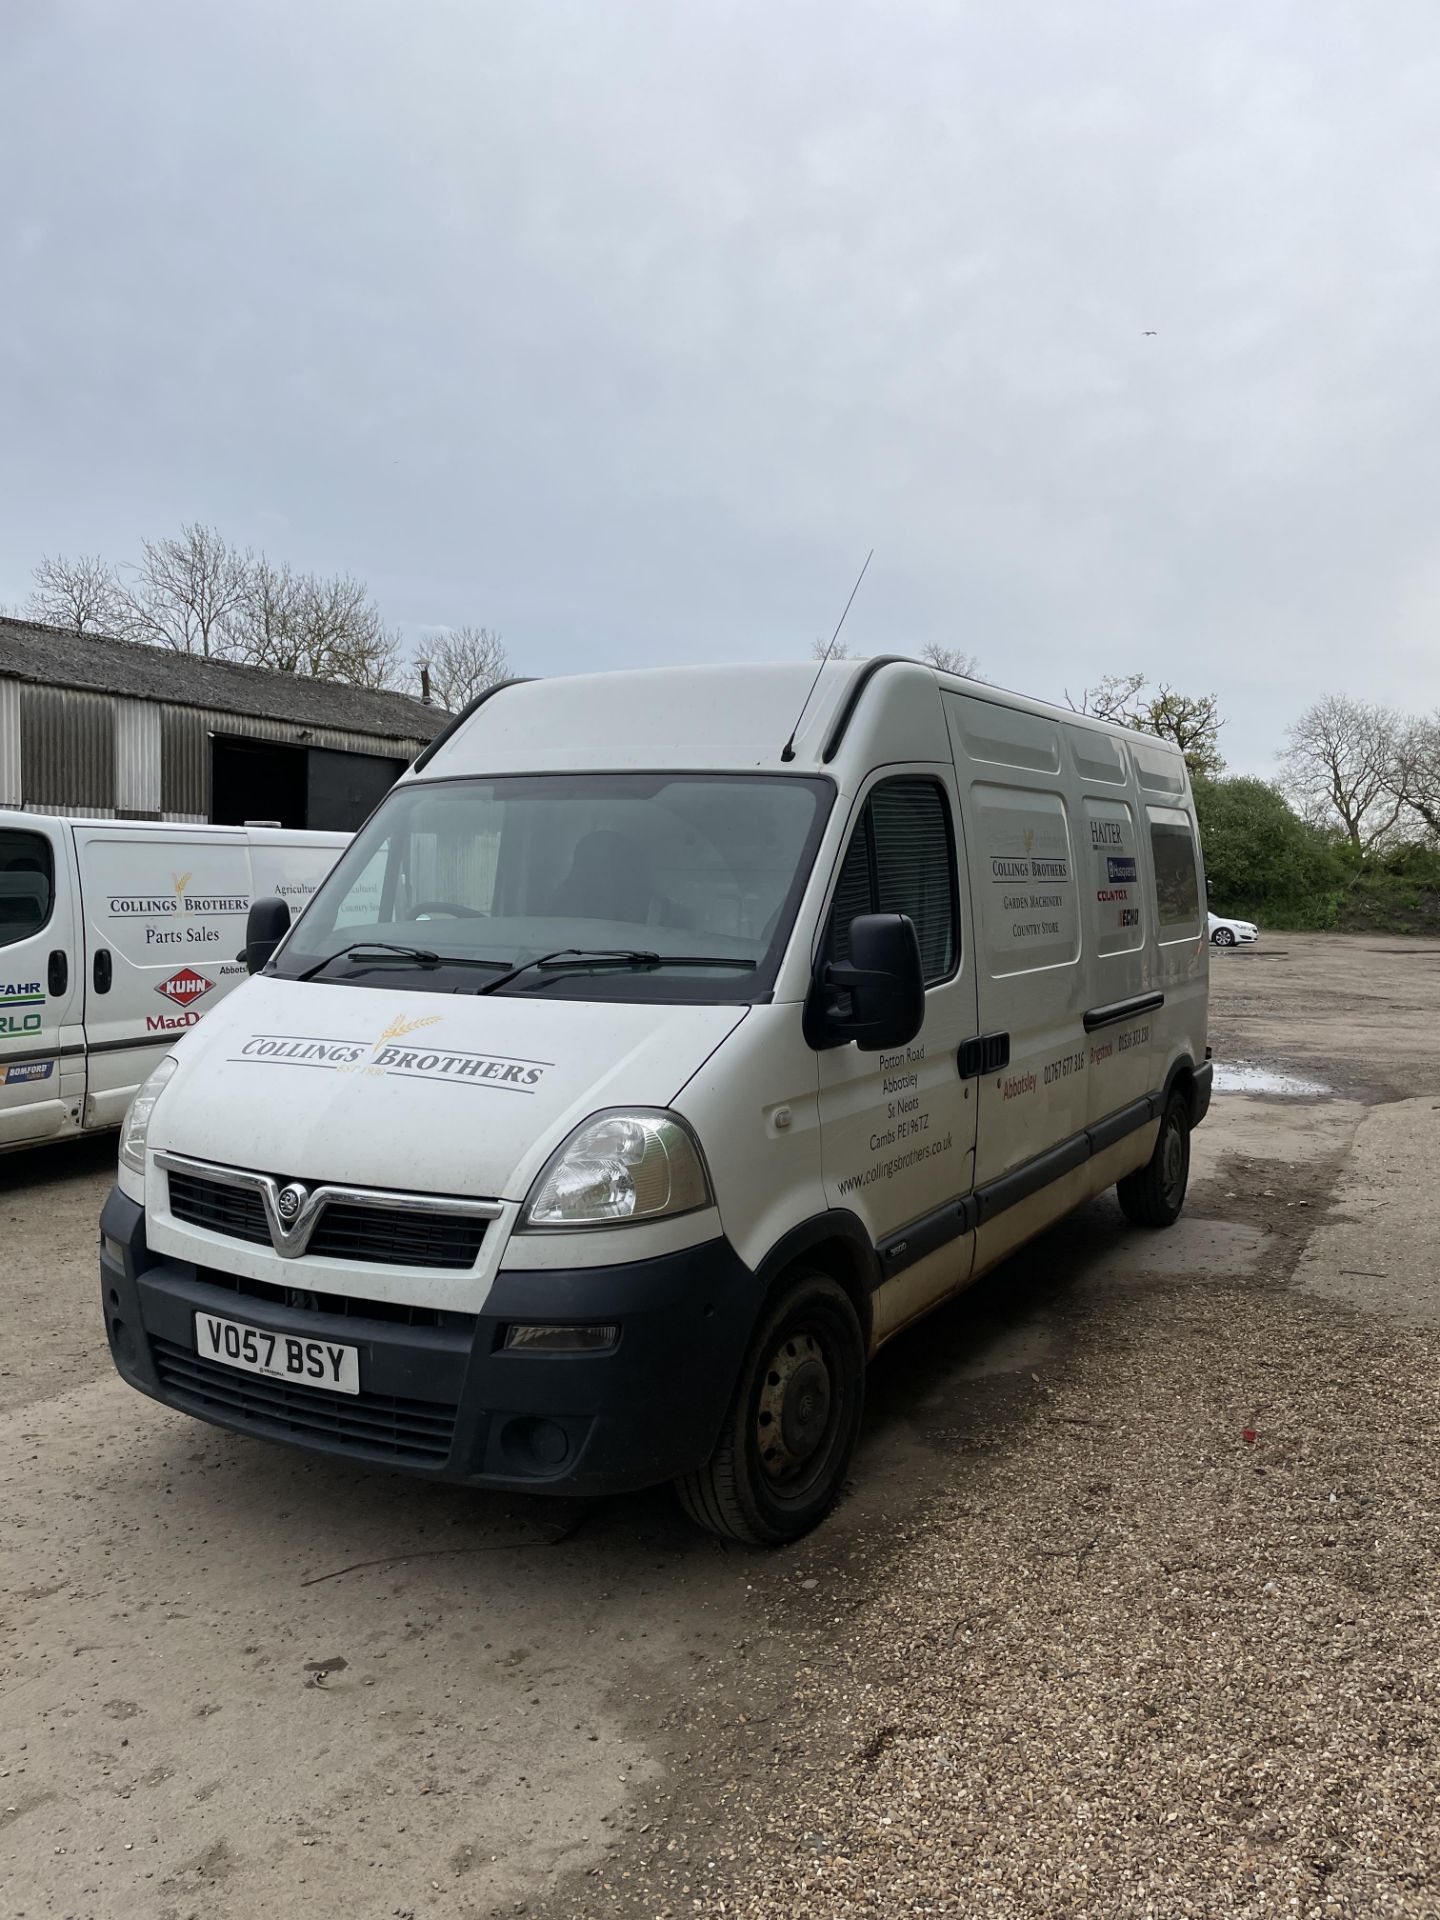 1: Vauxhall Movano 3.5T 2.5 CDTI (100 PS) High Roof (06) LWB Panel Van, Registration No. VO57 BSY, D - Image 2 of 7